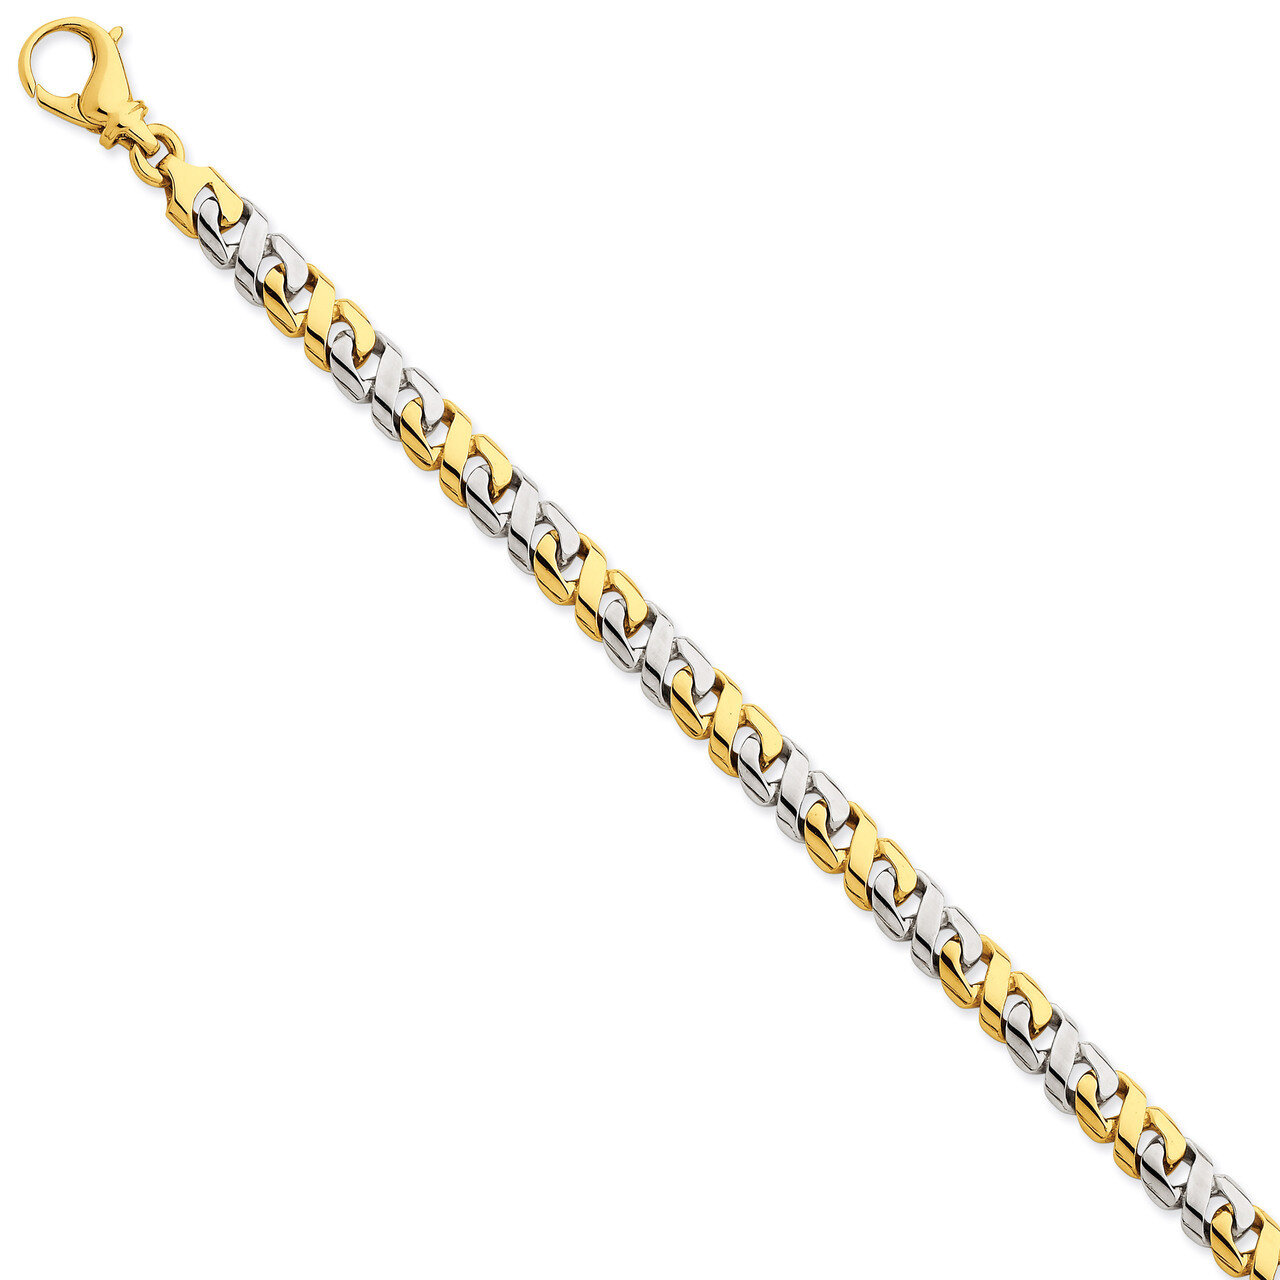 7.25mm Polished Fancy Link Chain 9 Inch 14k Two-Tone Gold LK527-9